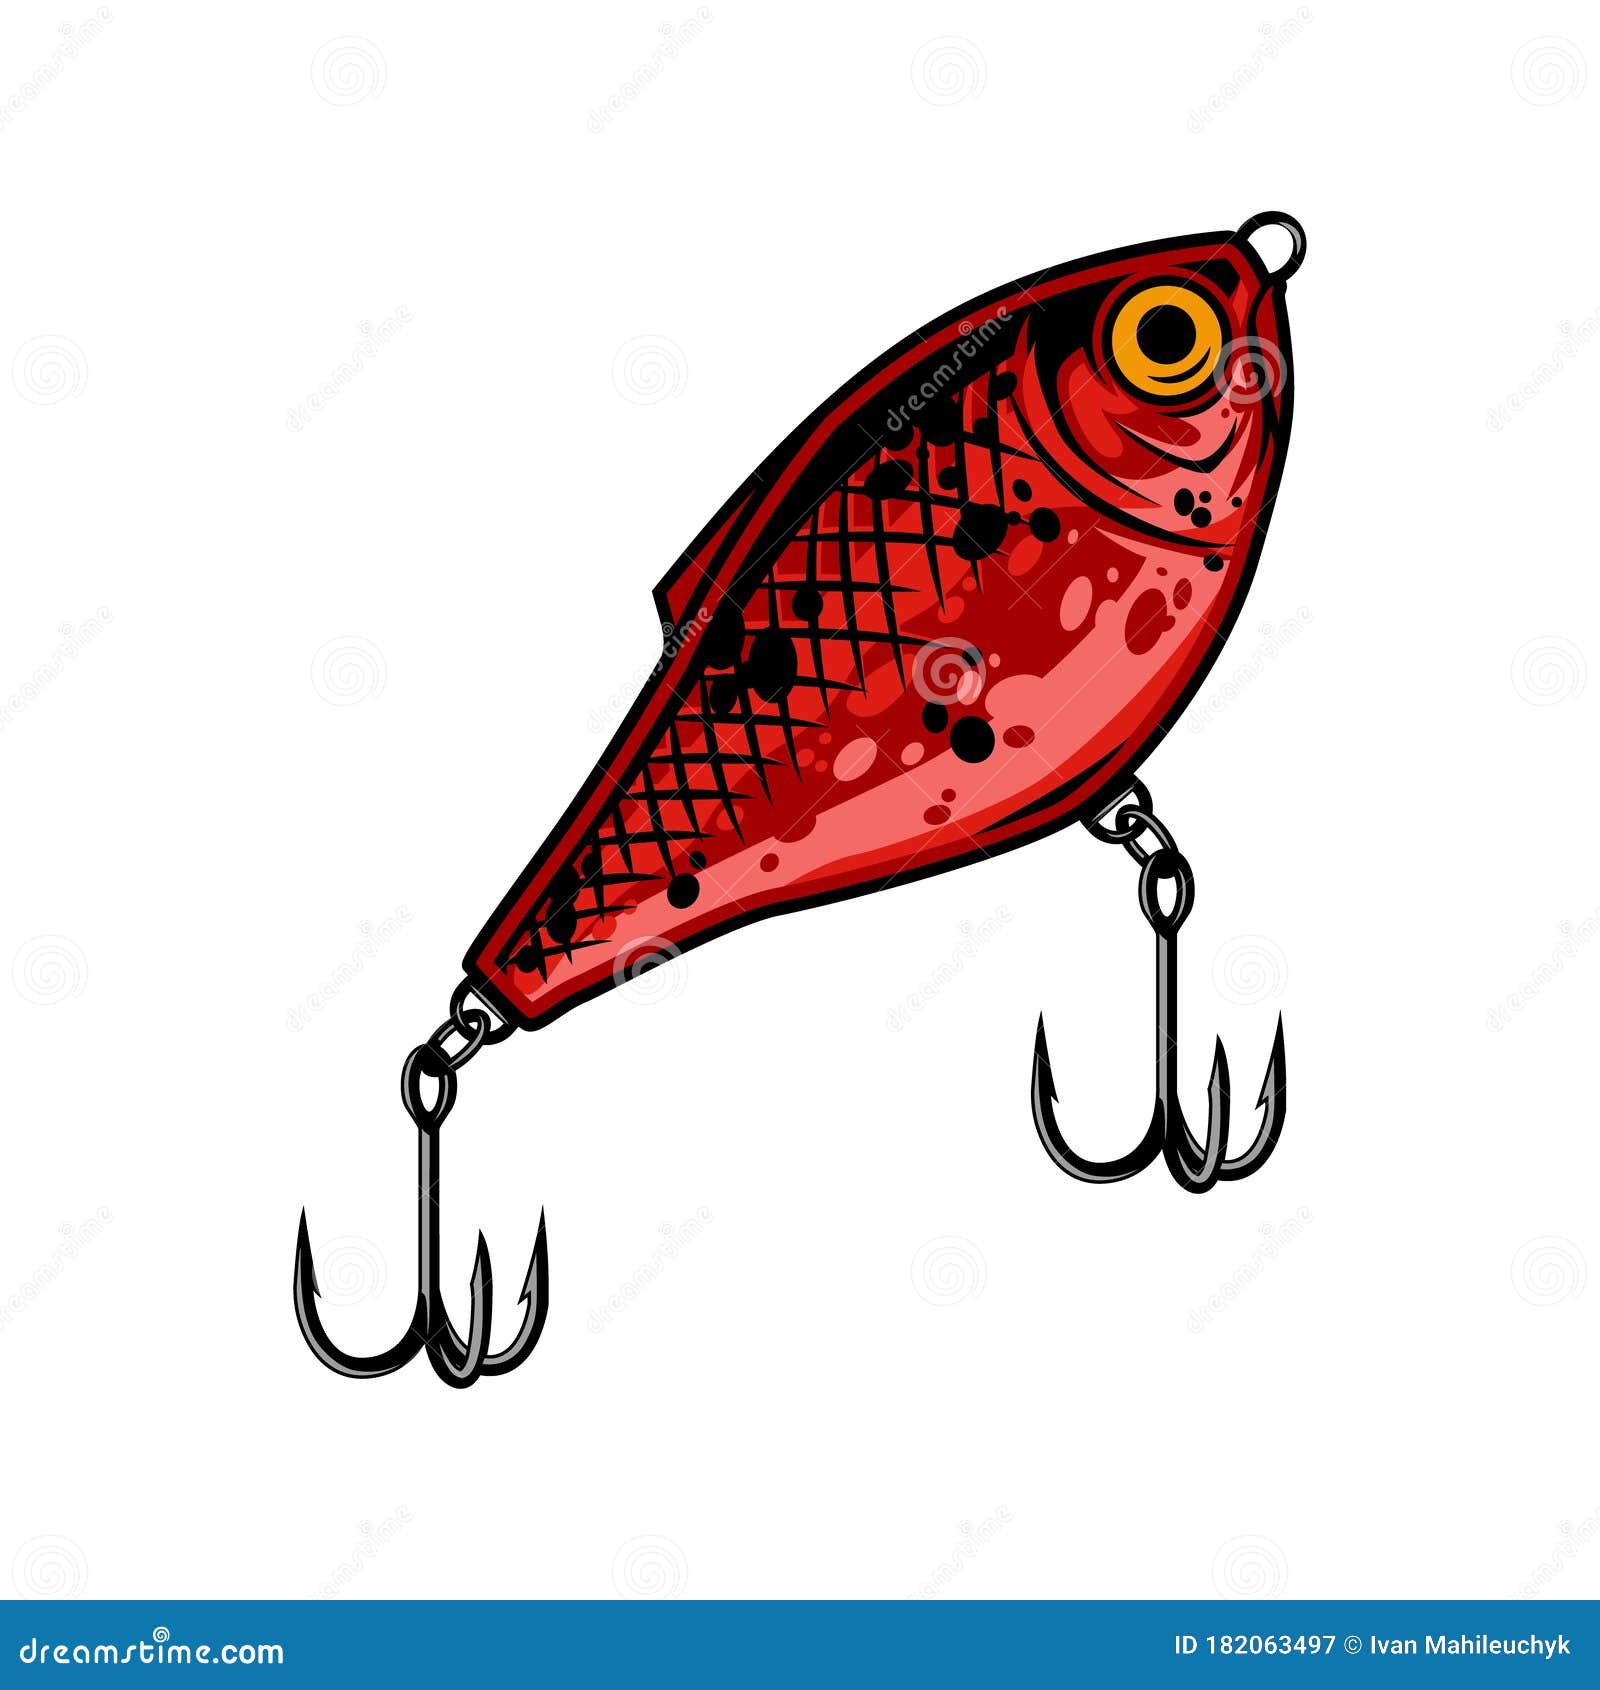 https://thumbs.dreamstime.com/z/red-fishing-lure-vintage-template-metal-hooks-white-background-isolated-vector-illustration-182063497.jpg